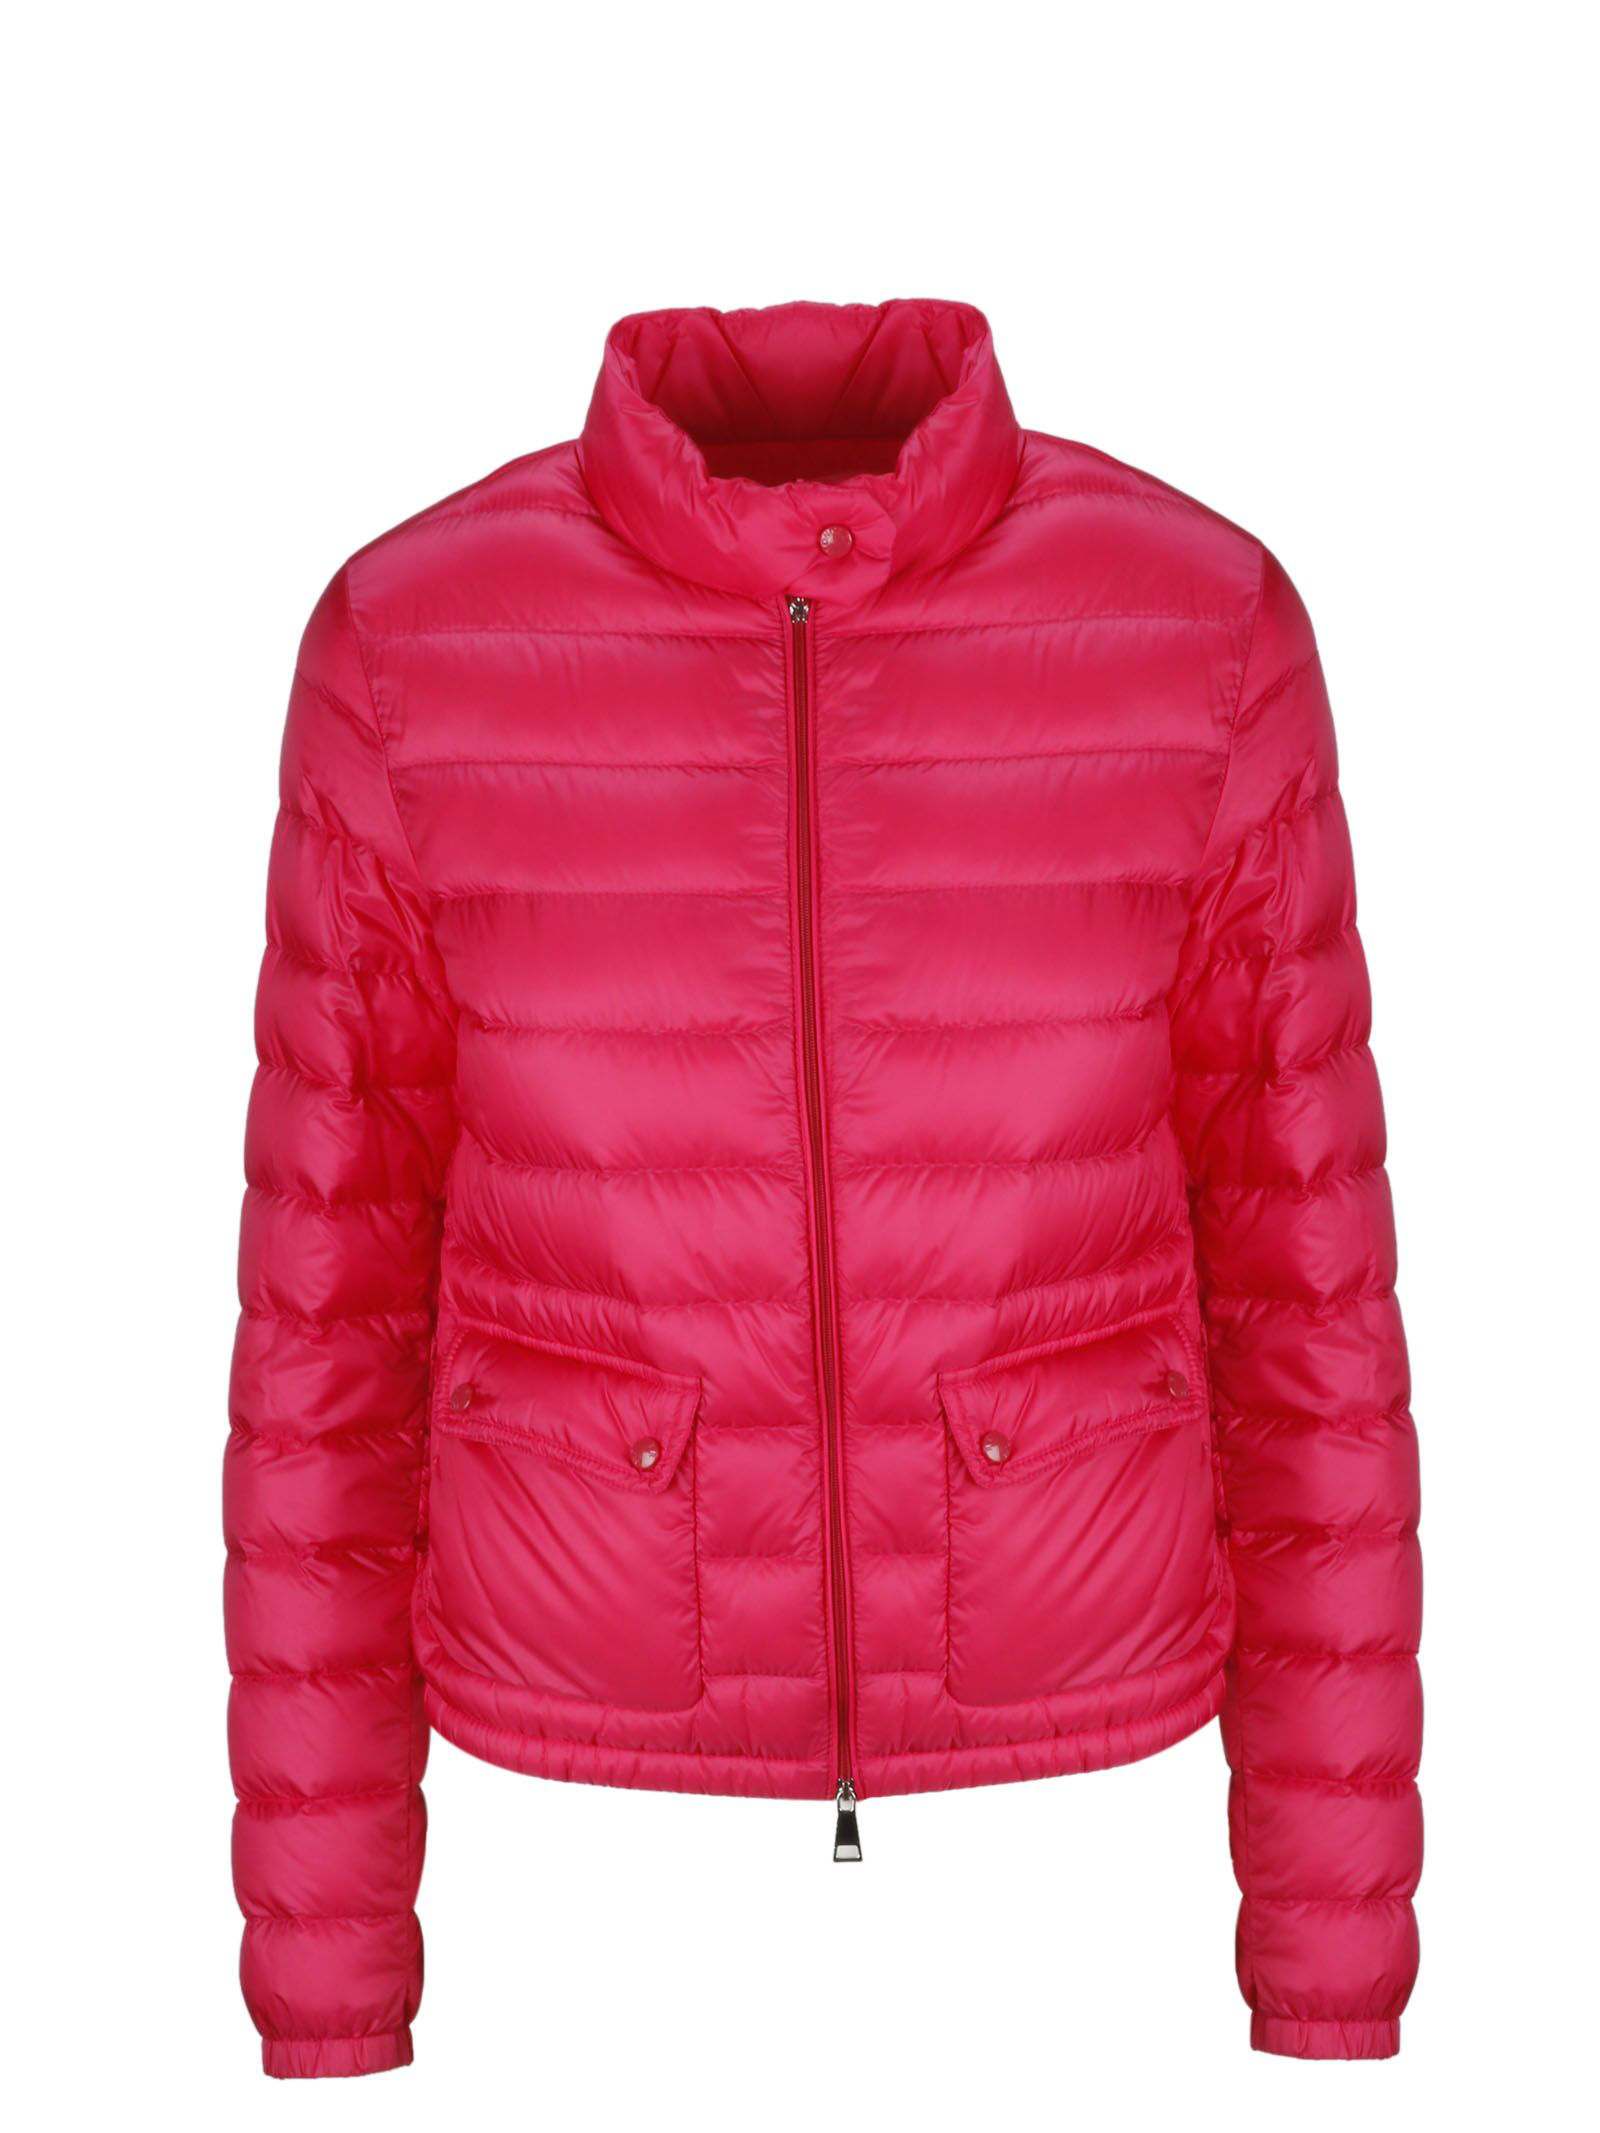 moncler classic, OFF 79%,Free delivery!